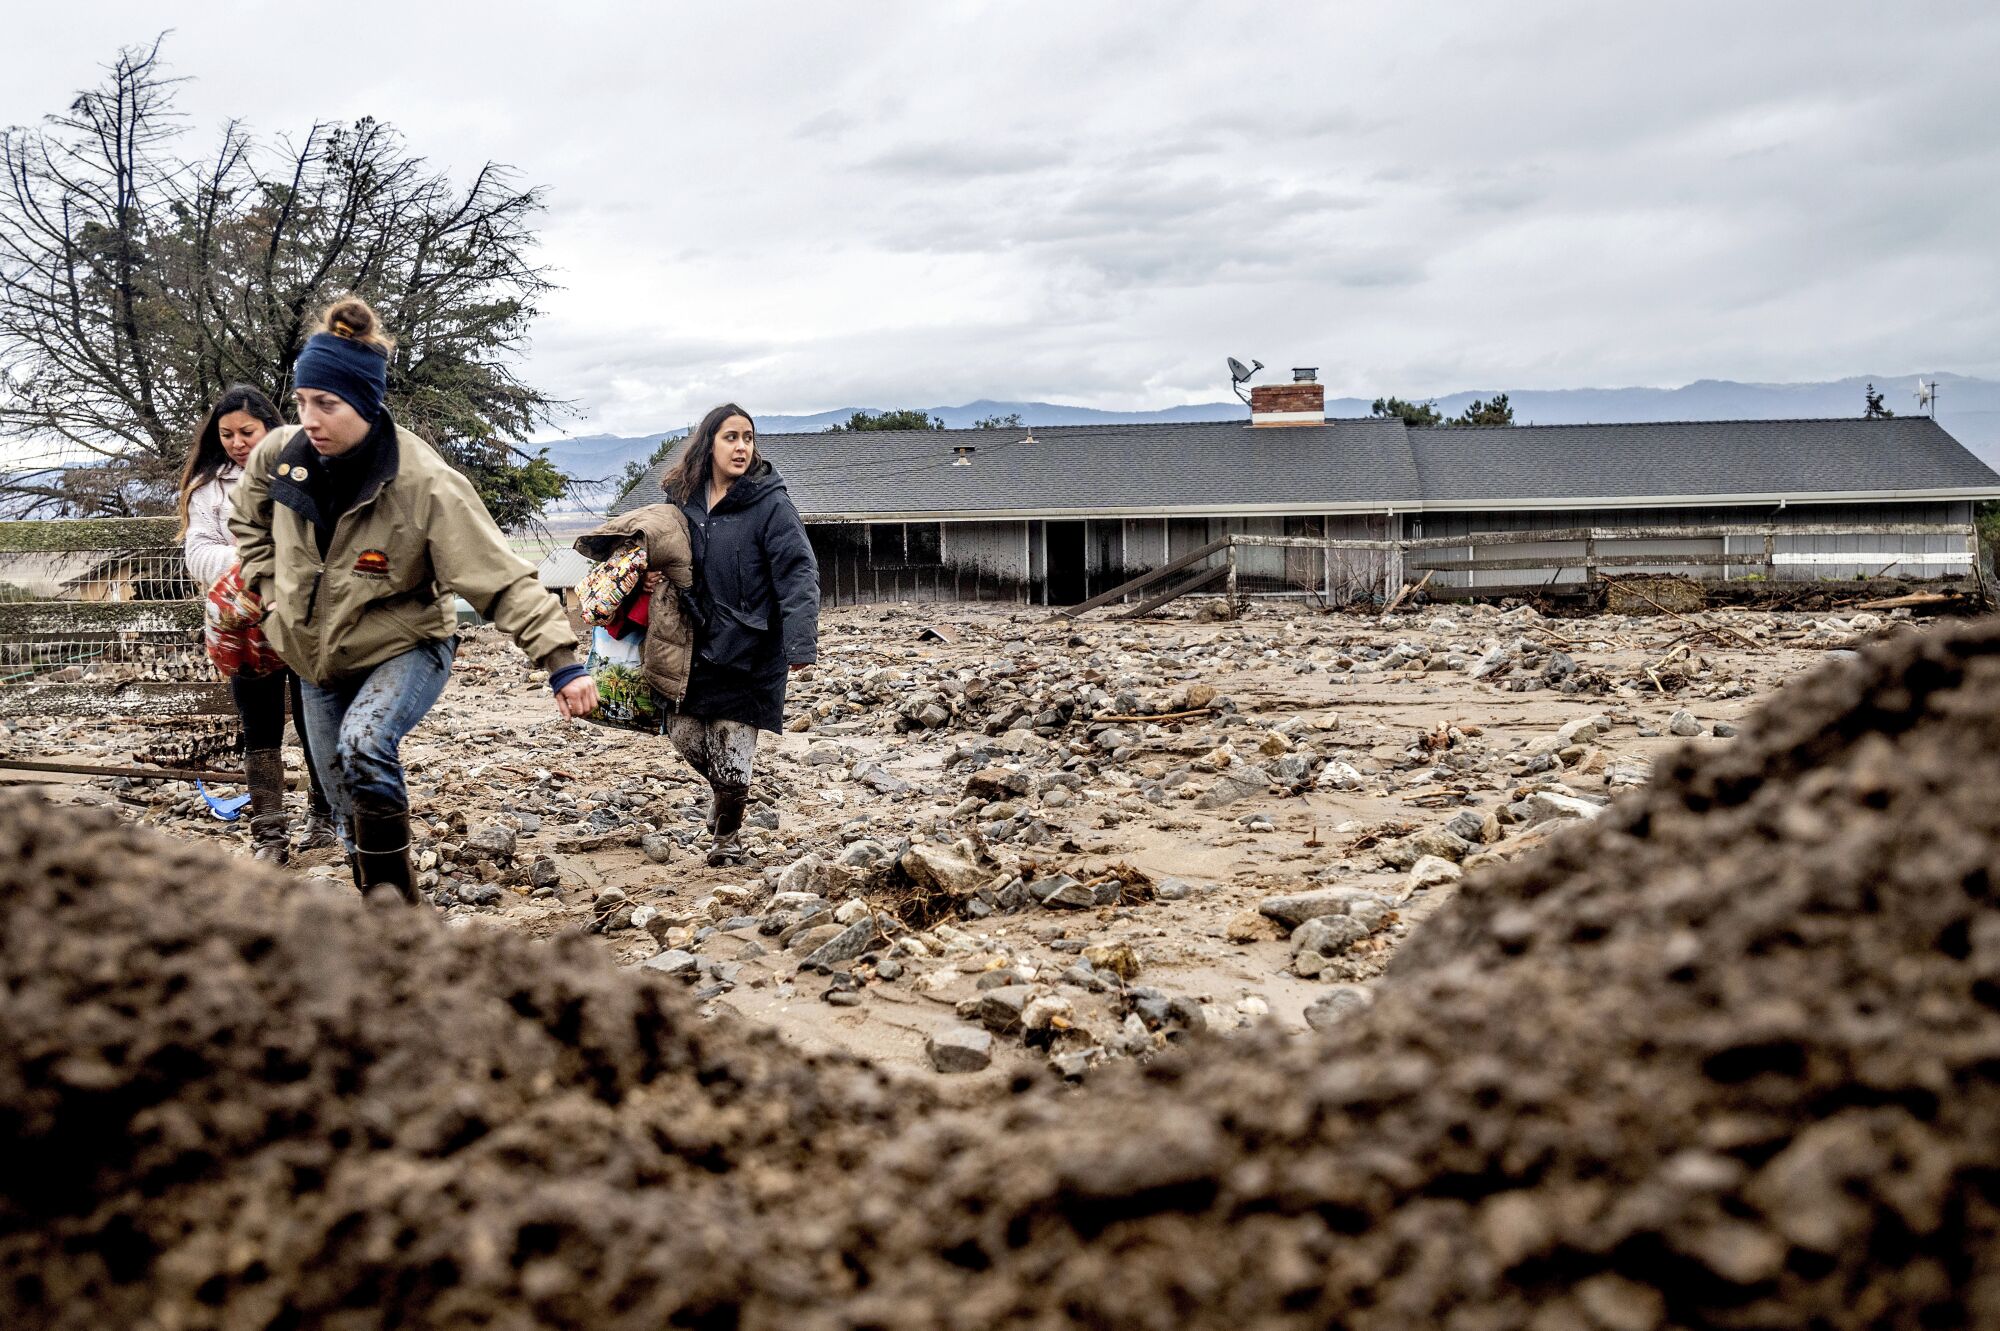 Hana Mohsin, right, carries belongings from a neighbor's home that was damaged in a mudslide on Wednesday in Salinas.